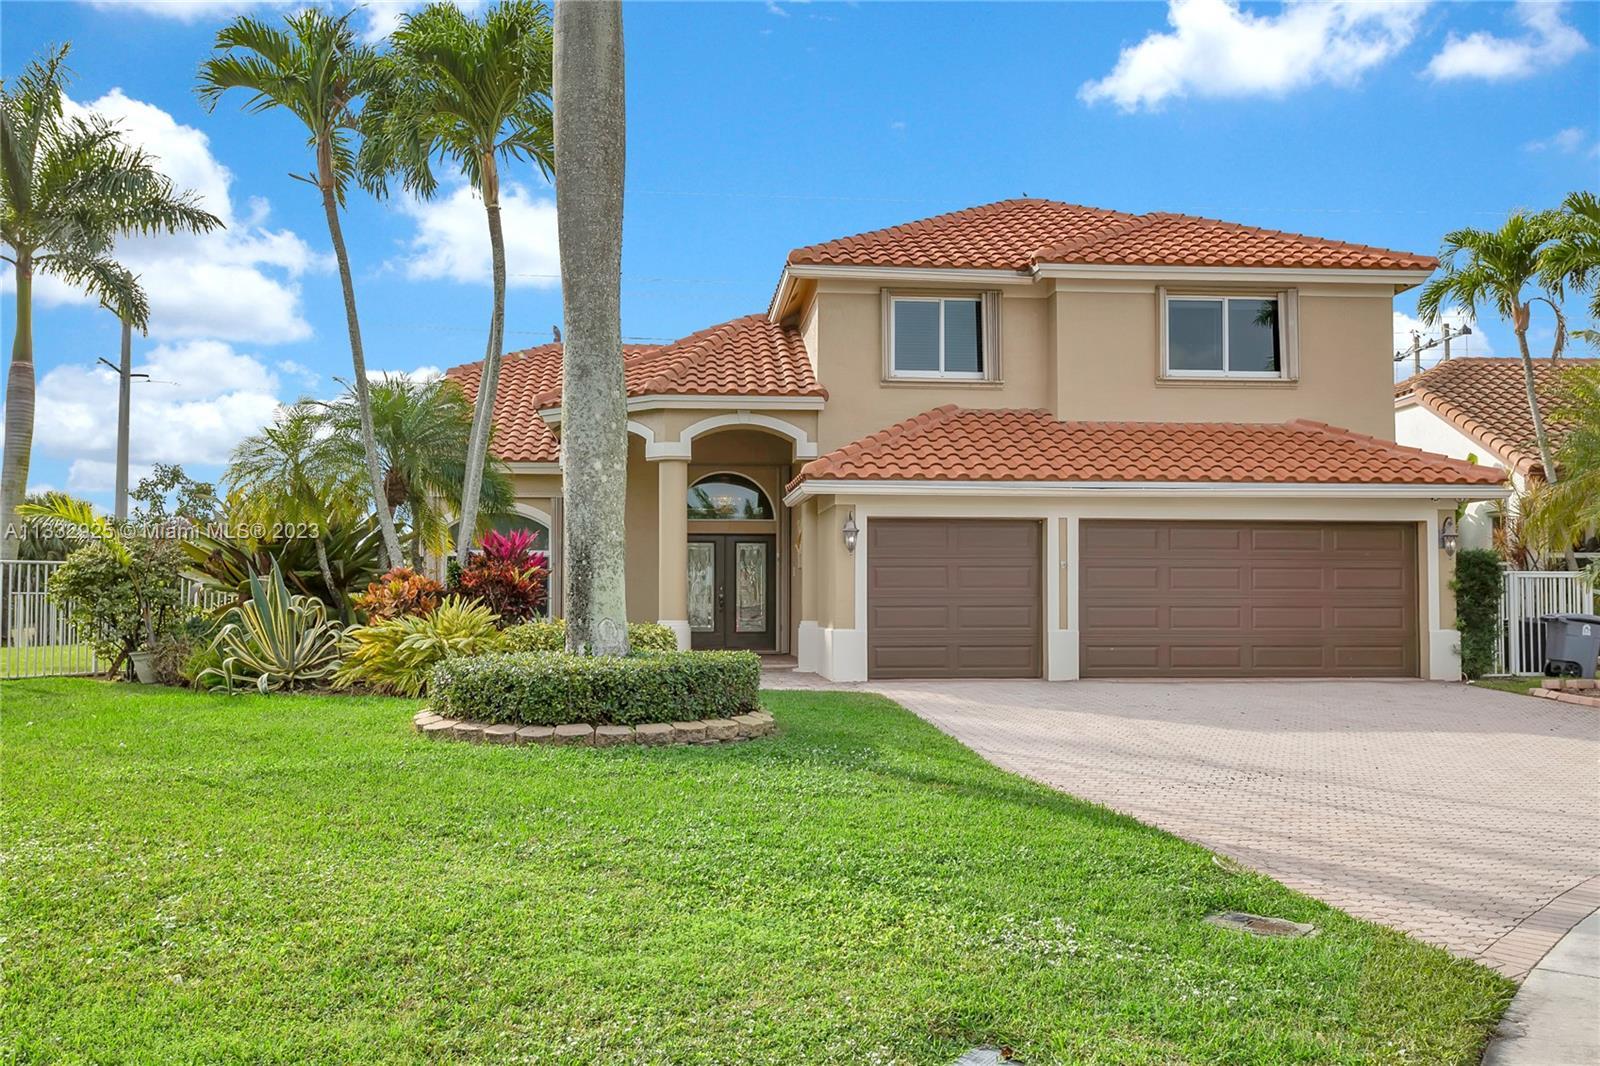 Boca Isles South is an exclusive, upscale, 24-hour gated community in West Boca Raton. This family-f